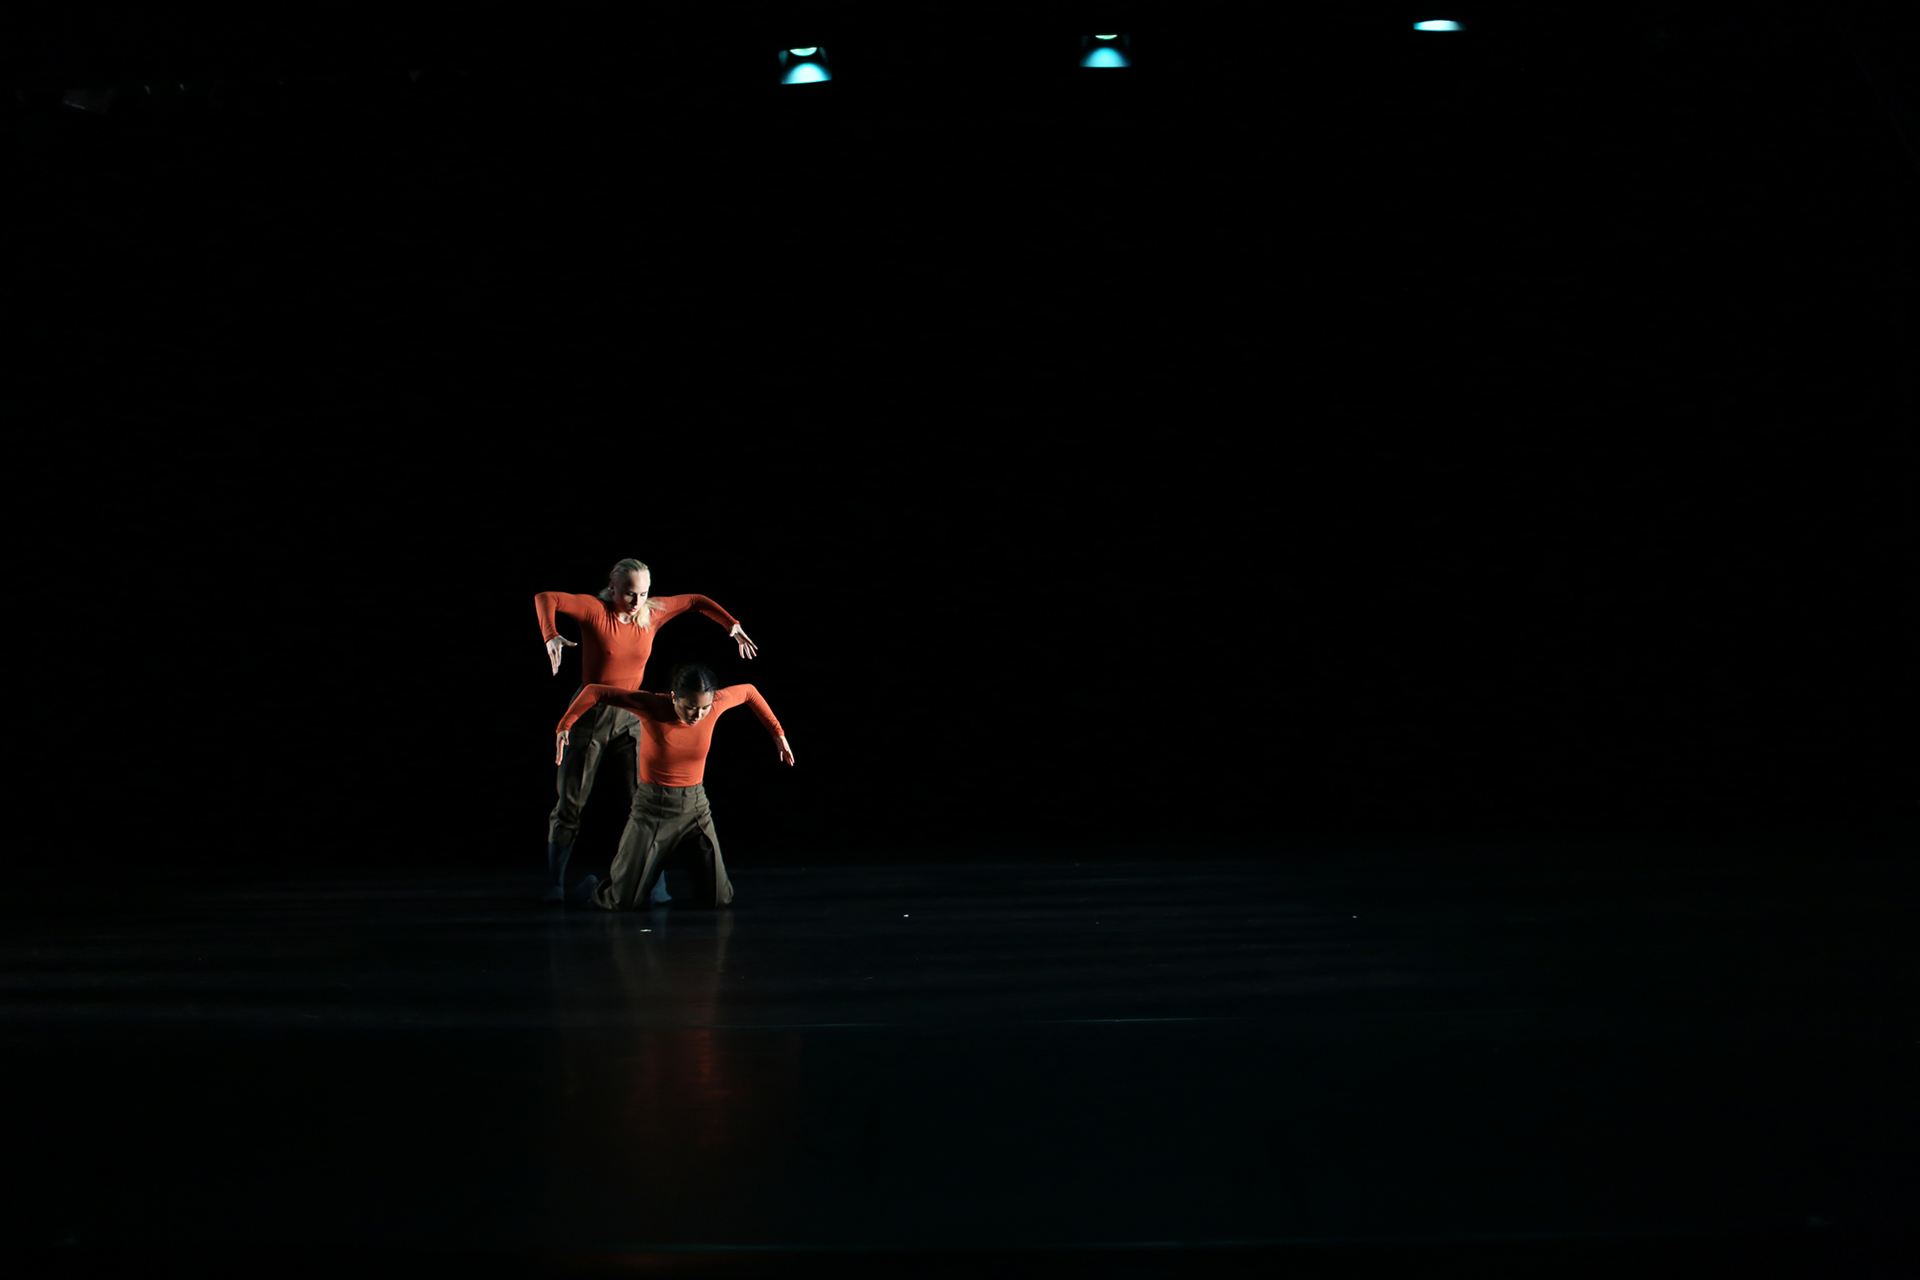 SADC 1 2018 "In Company" Choreographed by Yin-Yue Dance Company